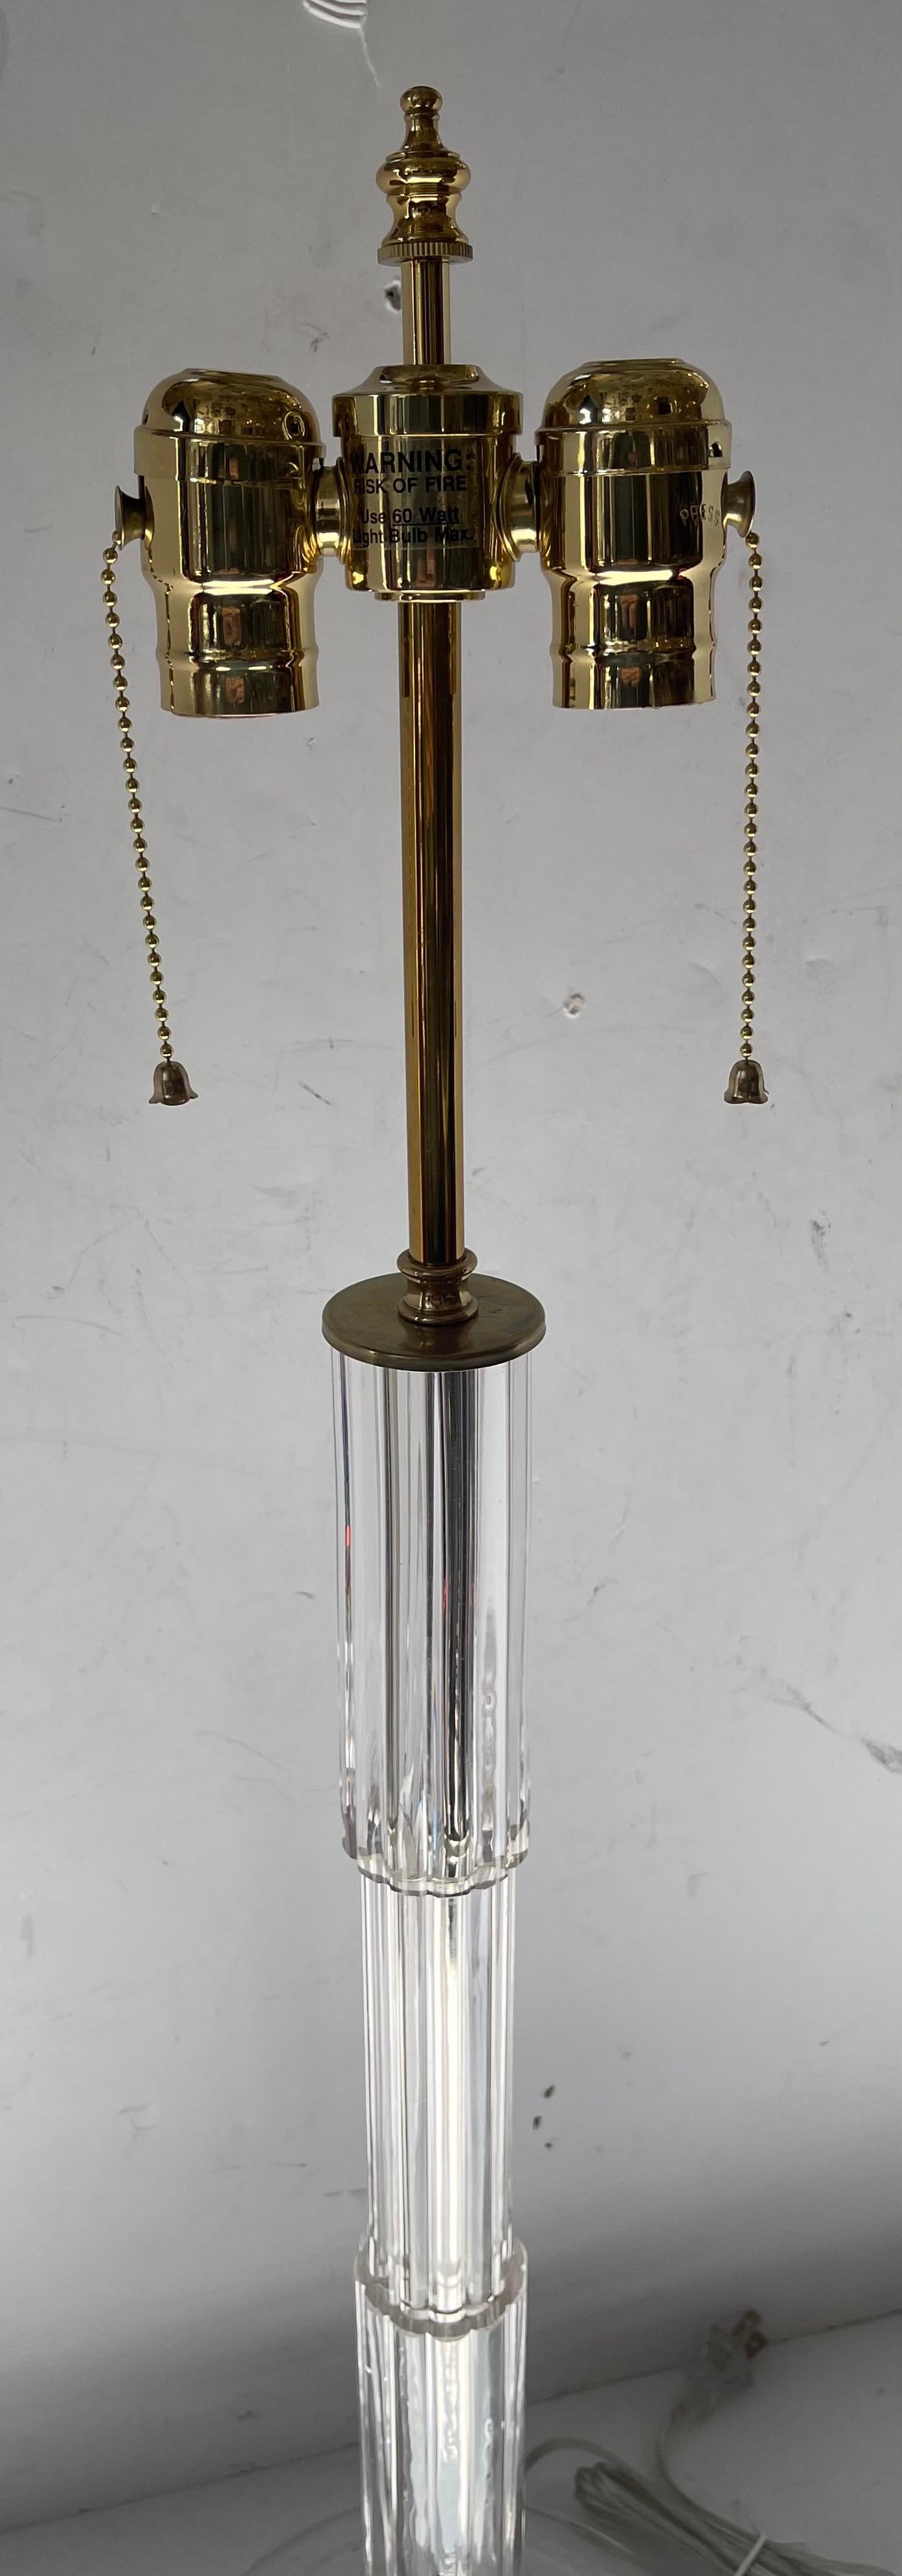 A wonderful Mid-Century Modern / Art Deco Italian Murano clear glass and polished brass single column lamp Rewired With A New Two Light Edison Cluster, retailed by Lorin Marsh NYC